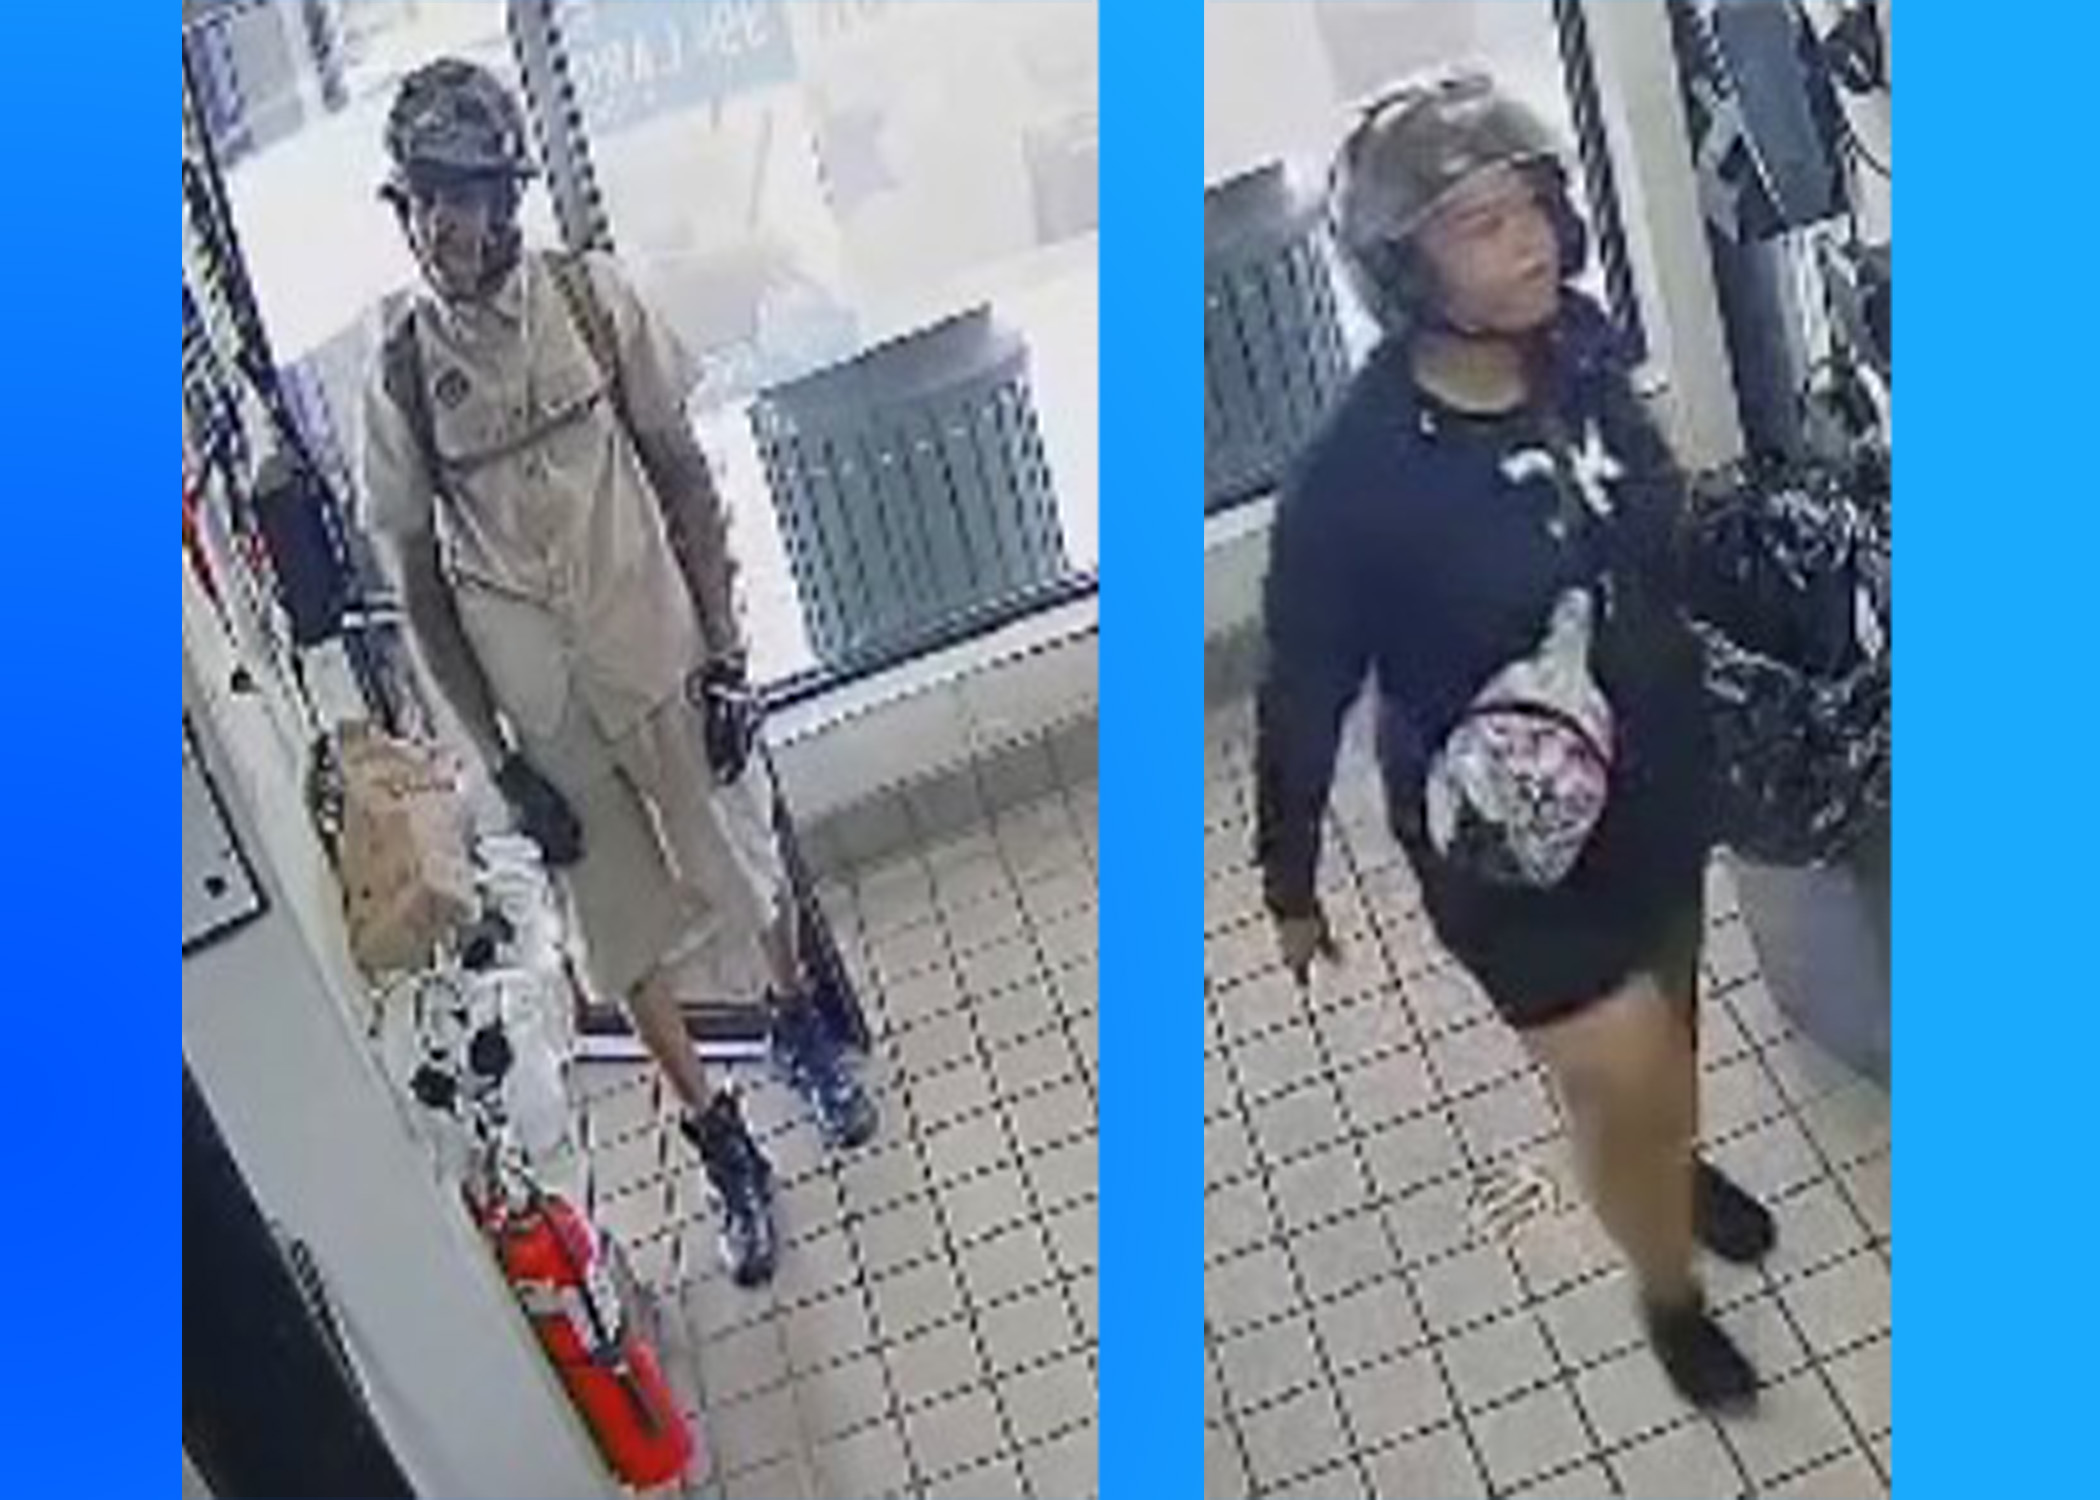 Two suspects sought in robbery investigation in Birmingham